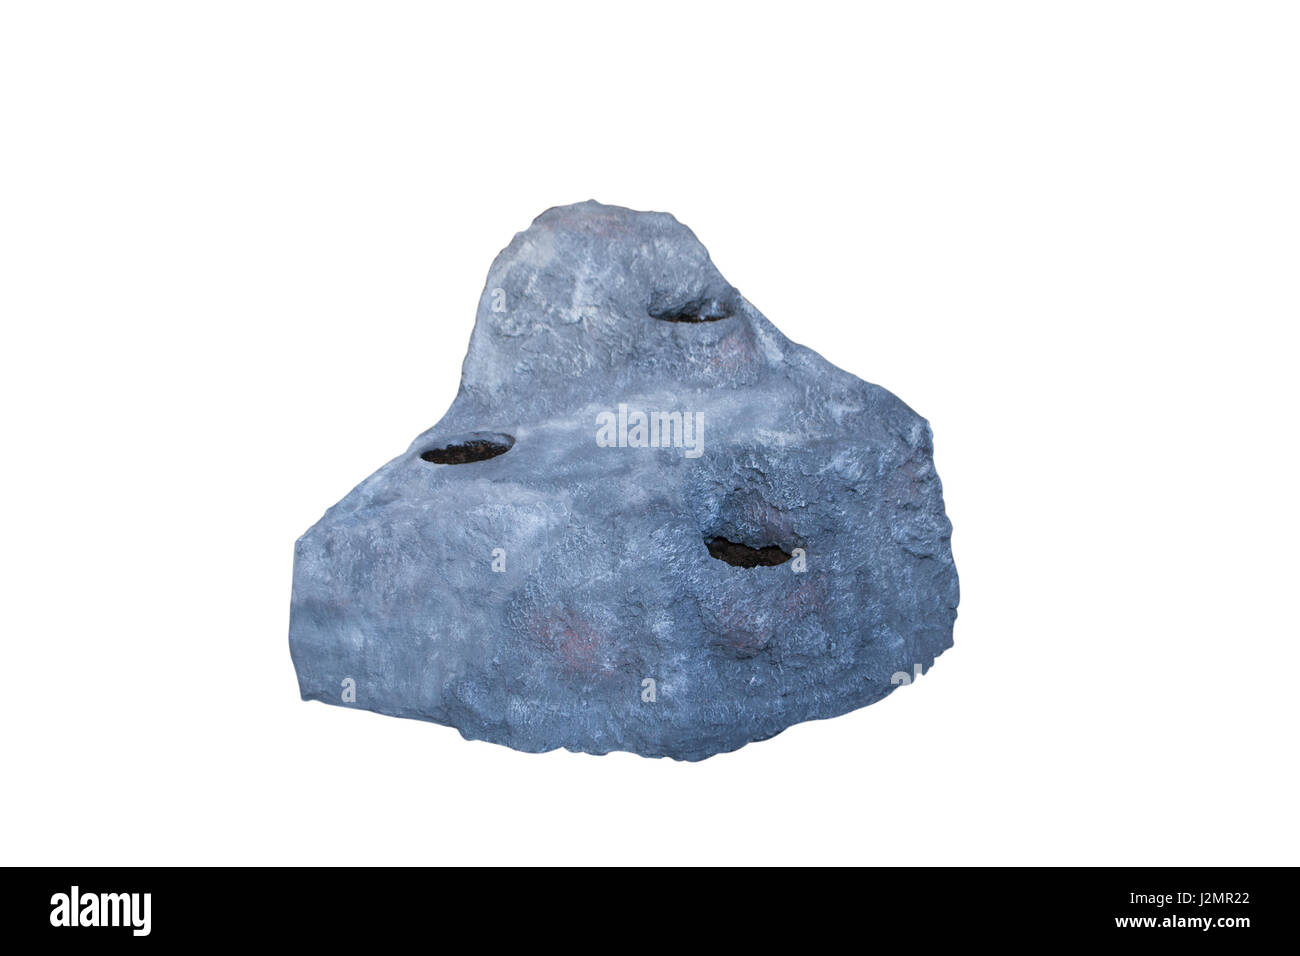 Alpine hill. Made of artificial stone. Isolate on white background. Stock Photo